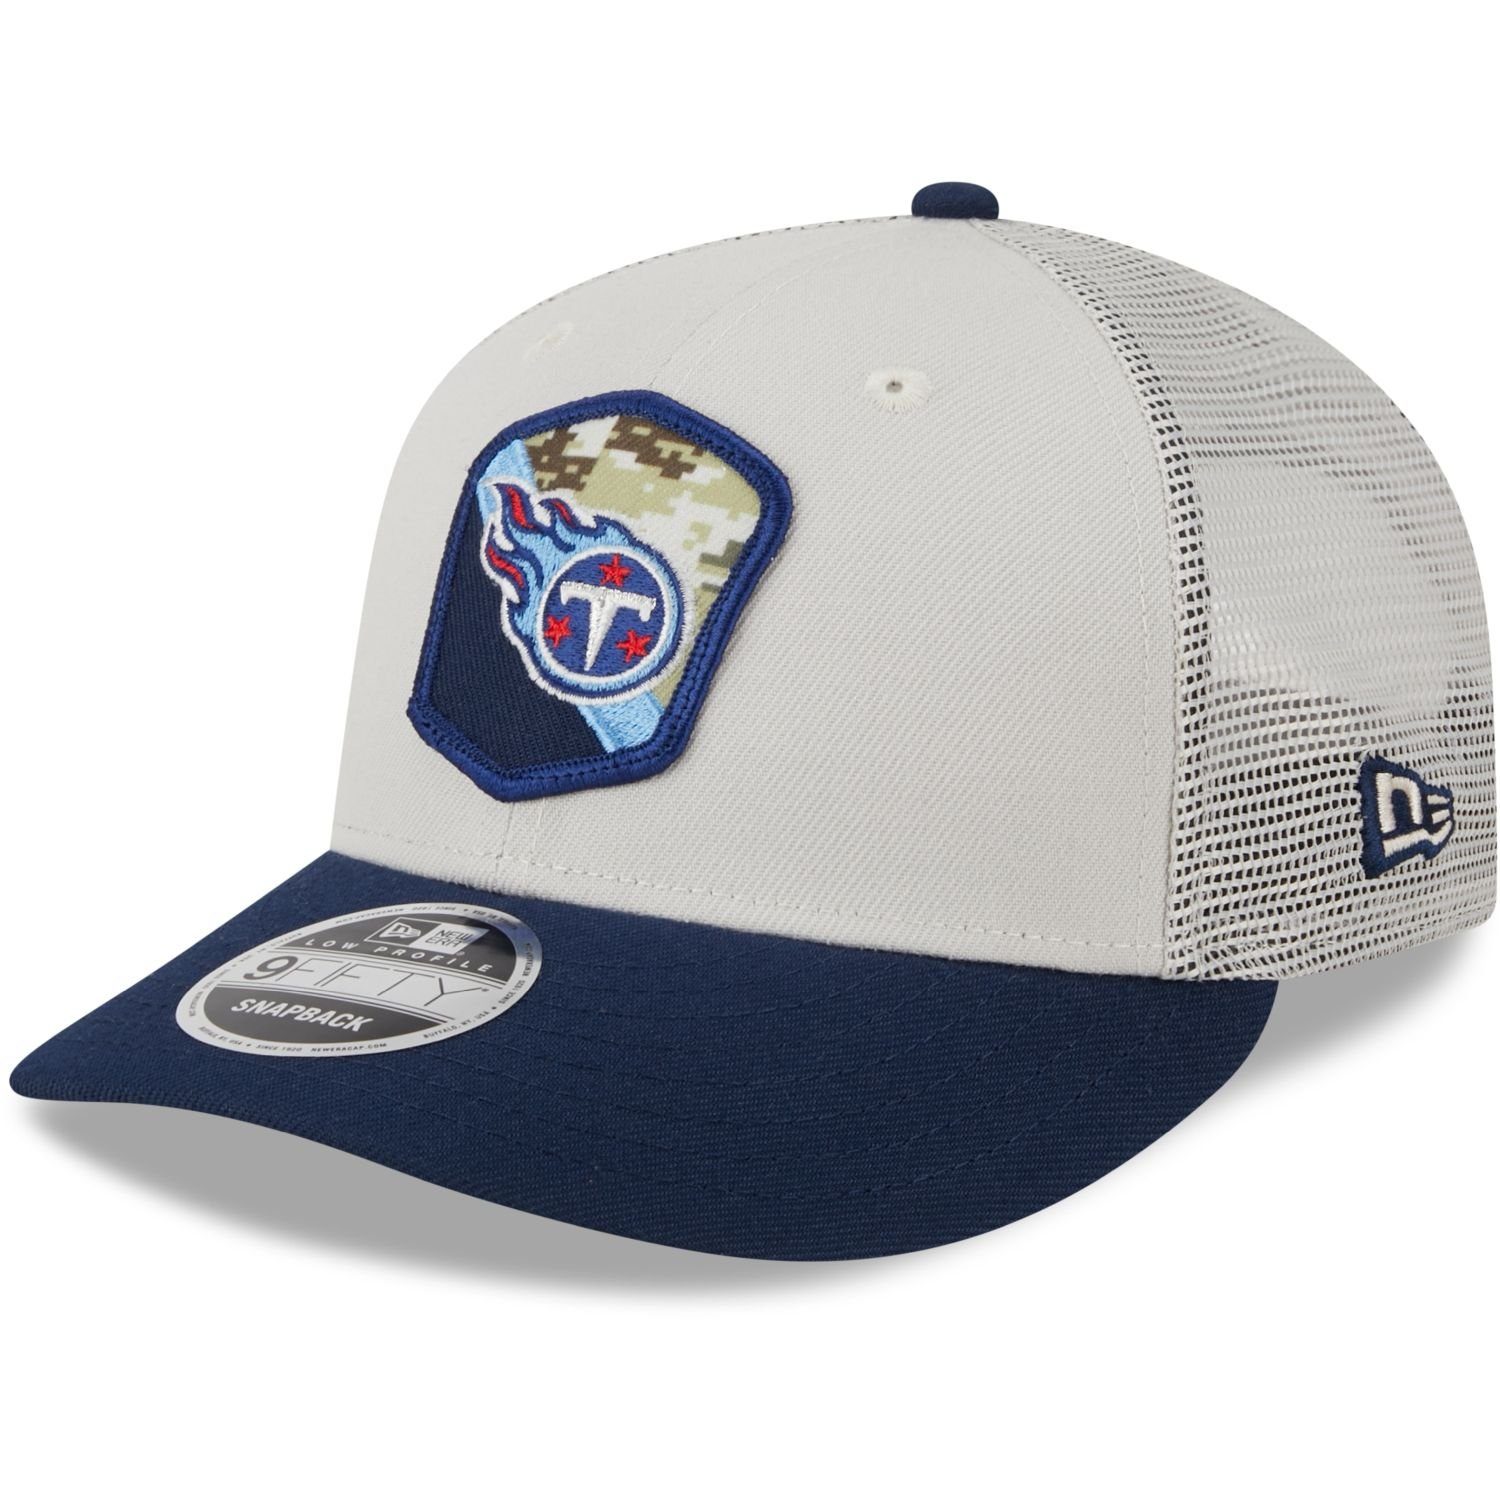 Profile Era Low Salute New Snap 9Fifty to Titans Service Tennessee NFL Cap Snapback